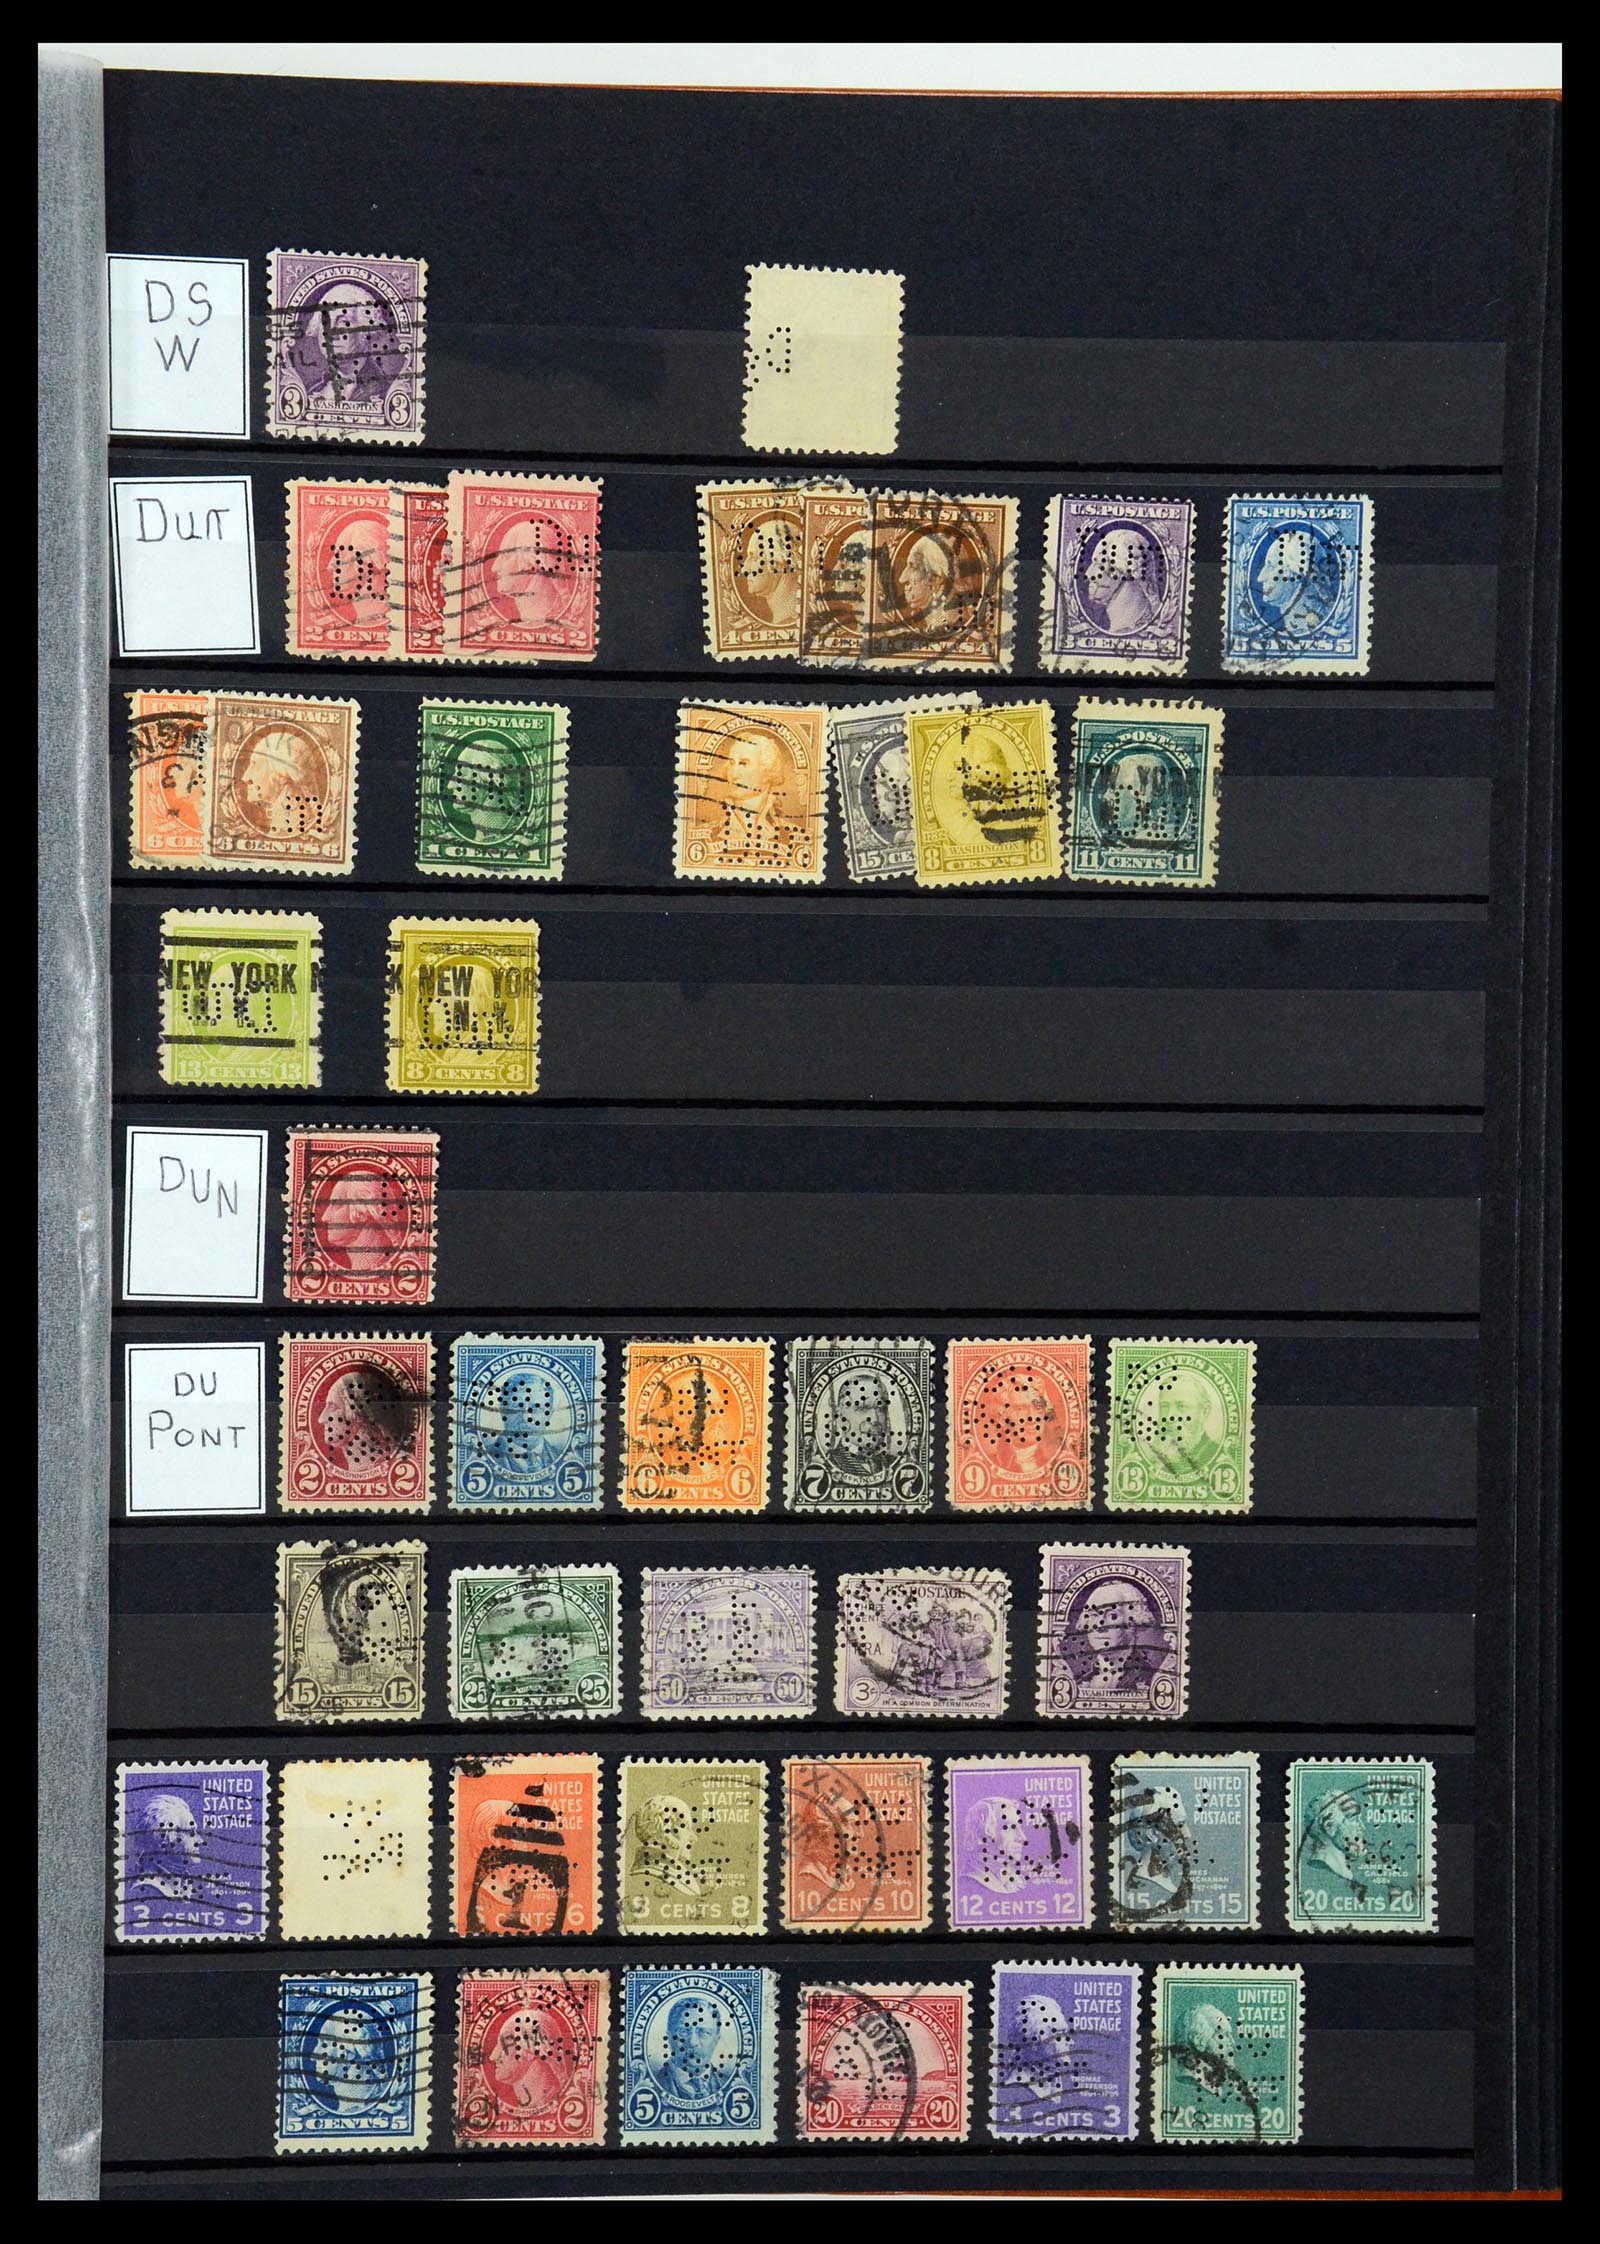 36388 039 - Stamp collection 36388 USA perfins.